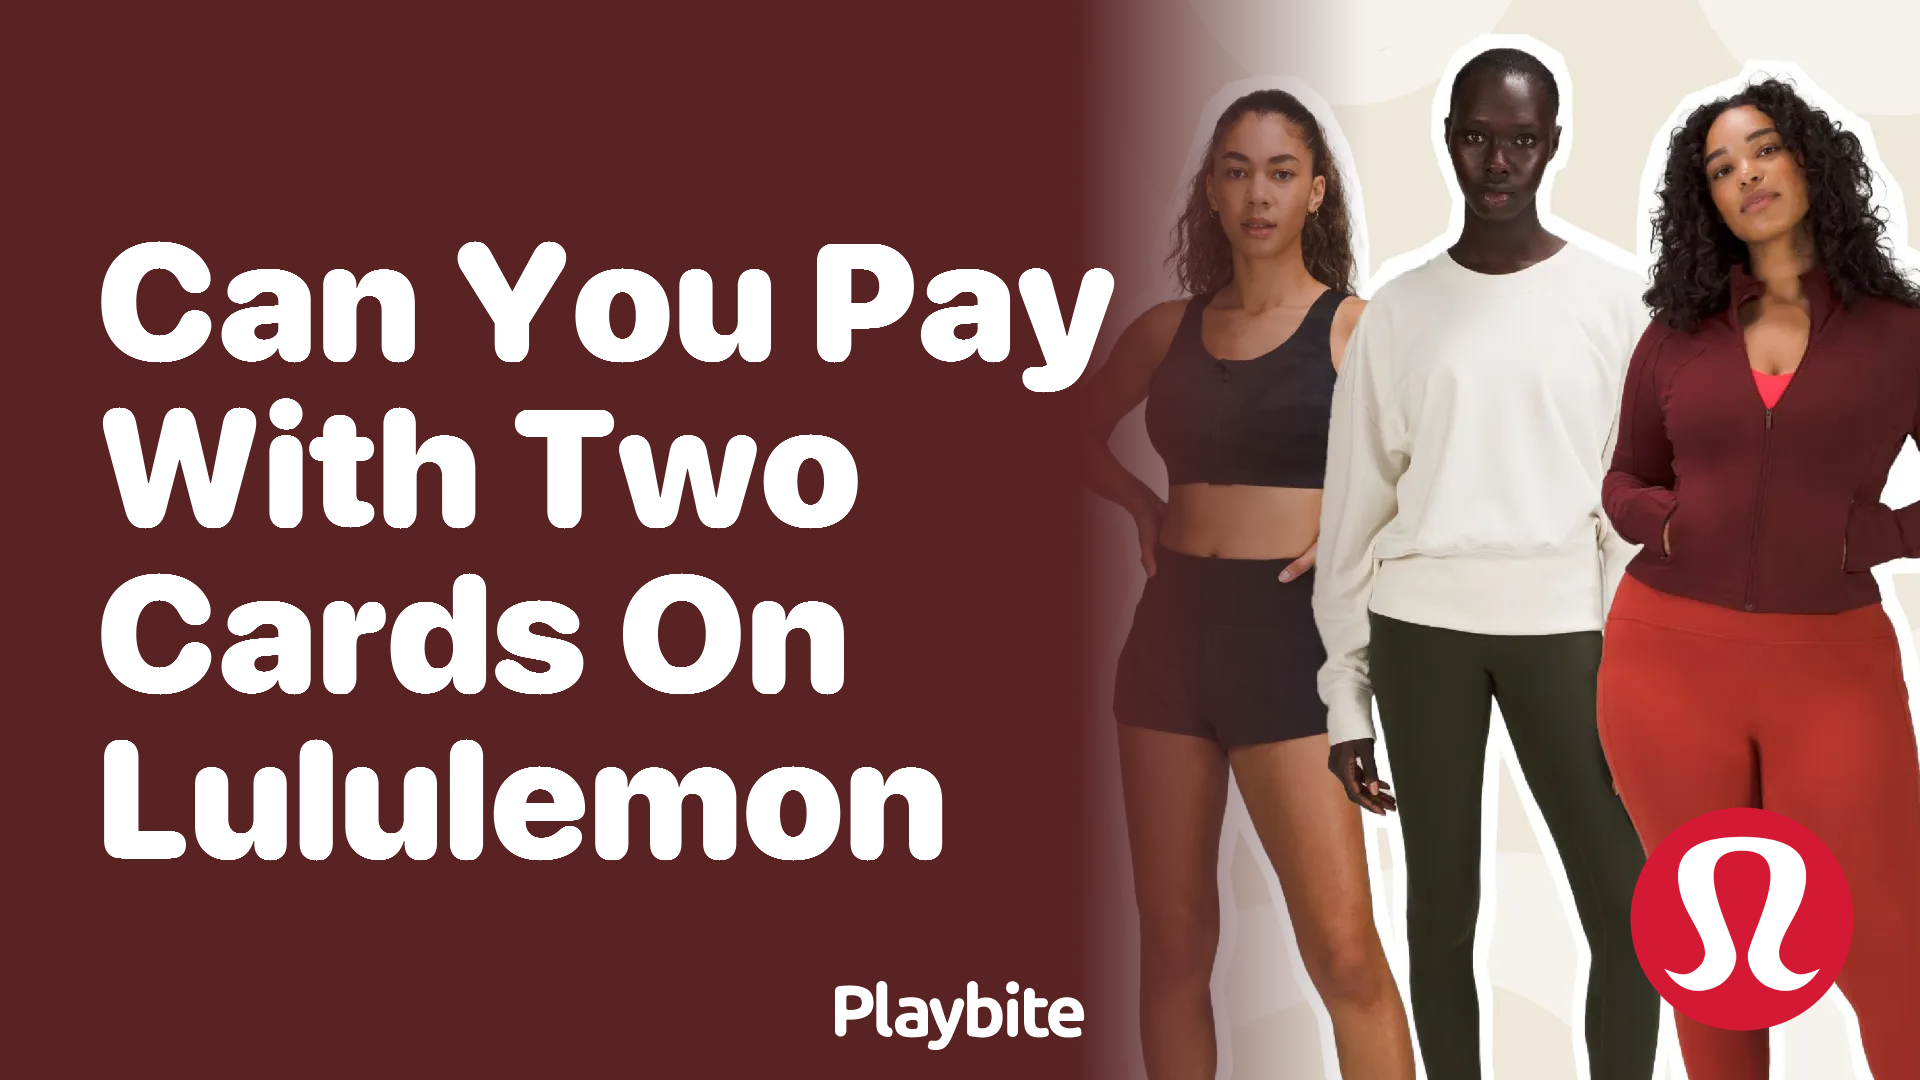 Can You Pay with Two Cards on Lululemon? - Playbite